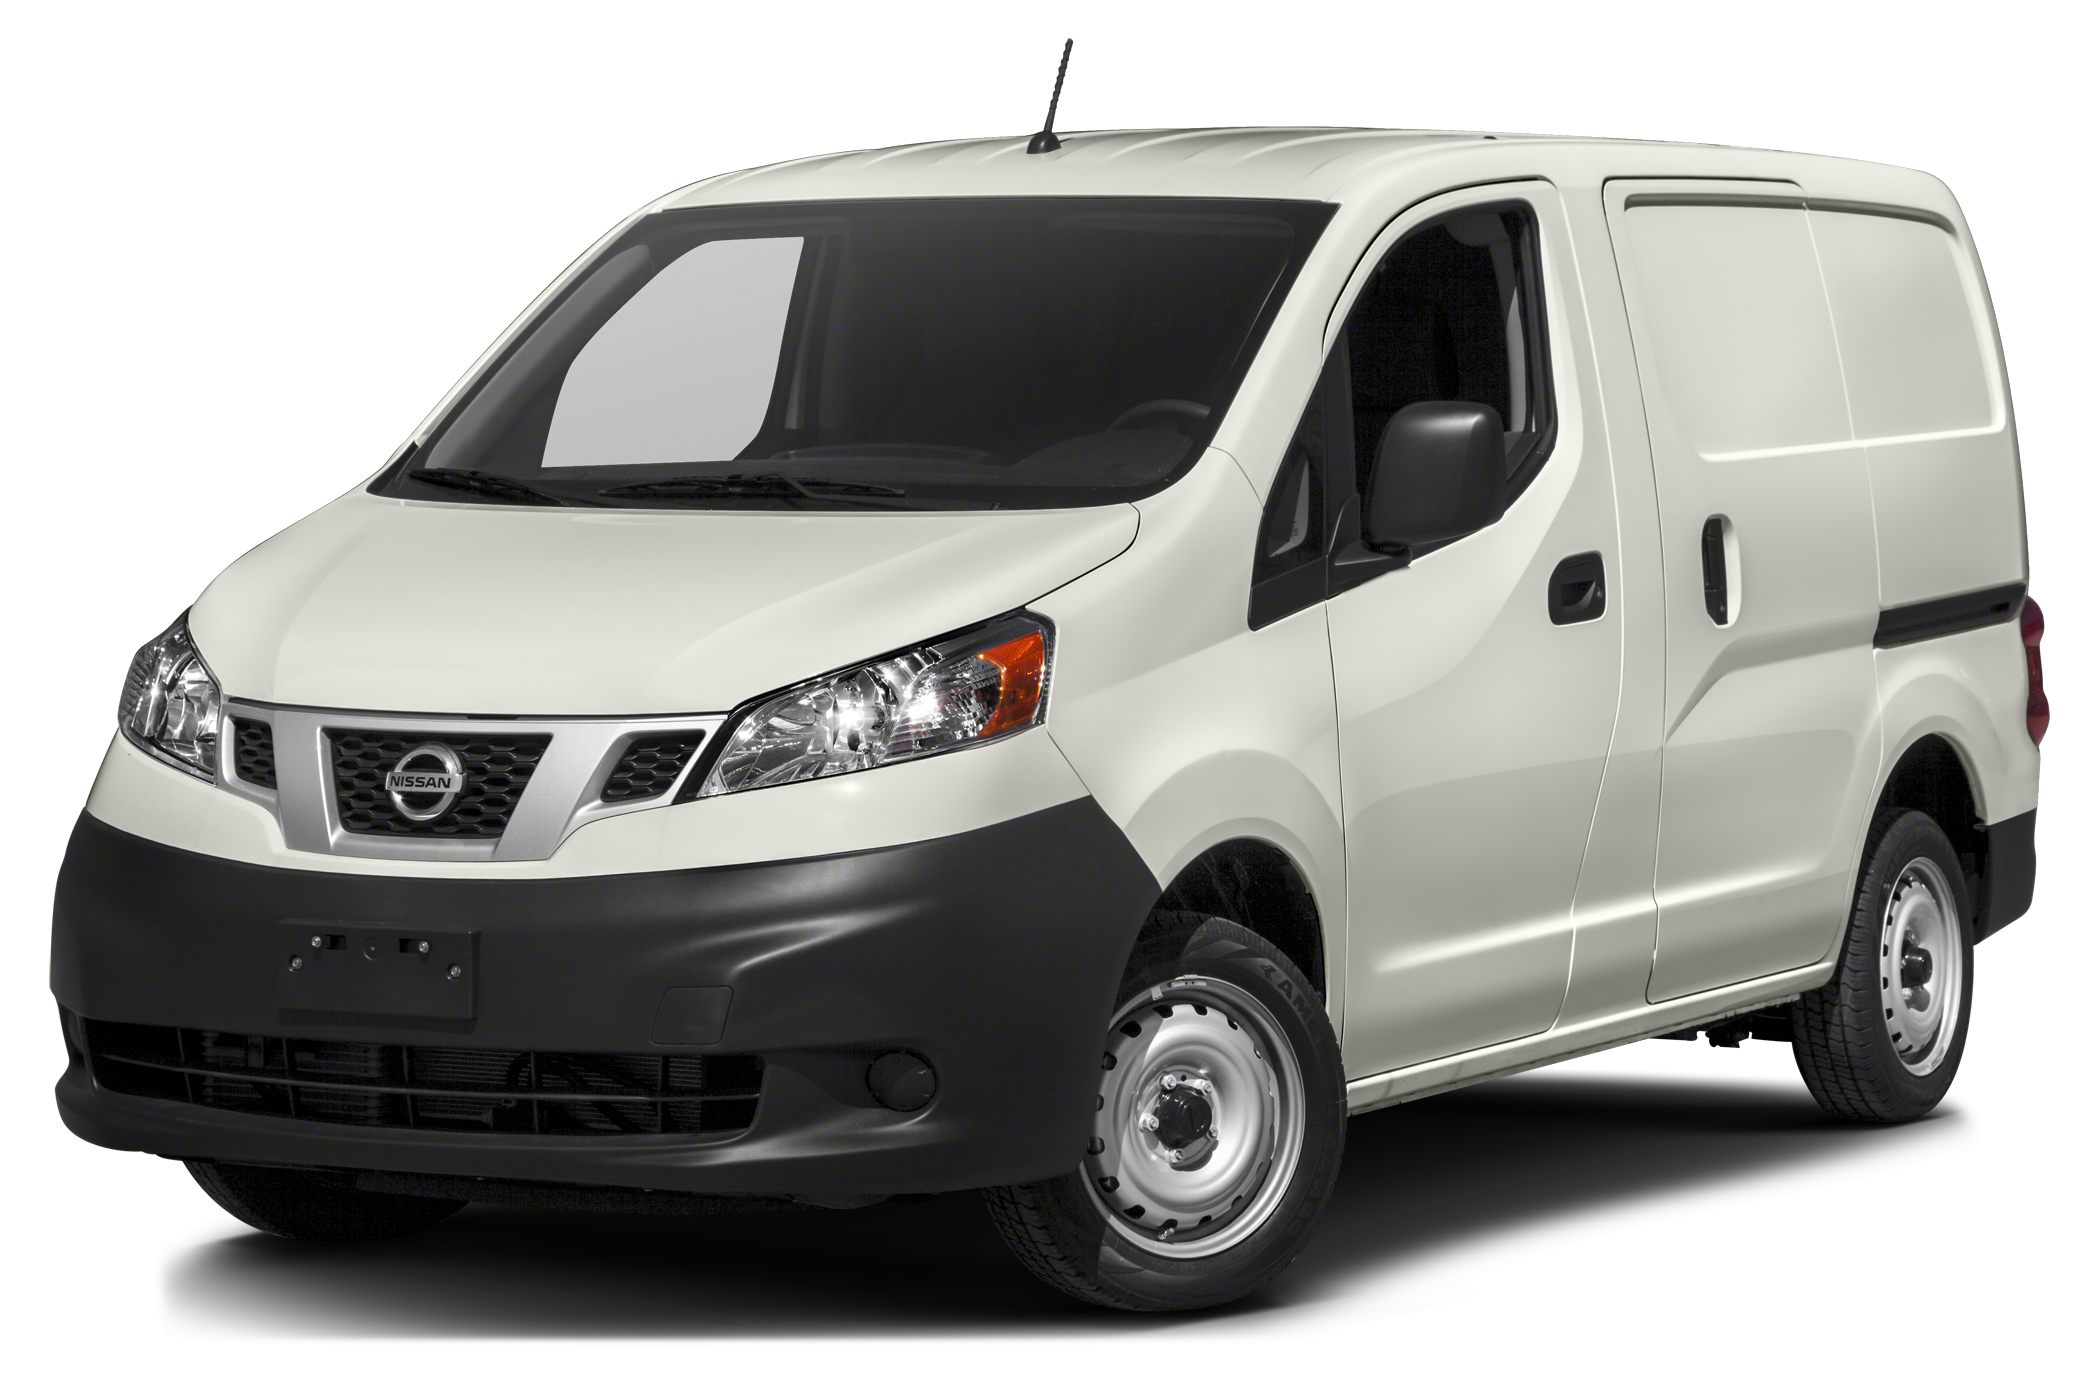 2016 Nissan NV200 Owner Reviews and Ratings